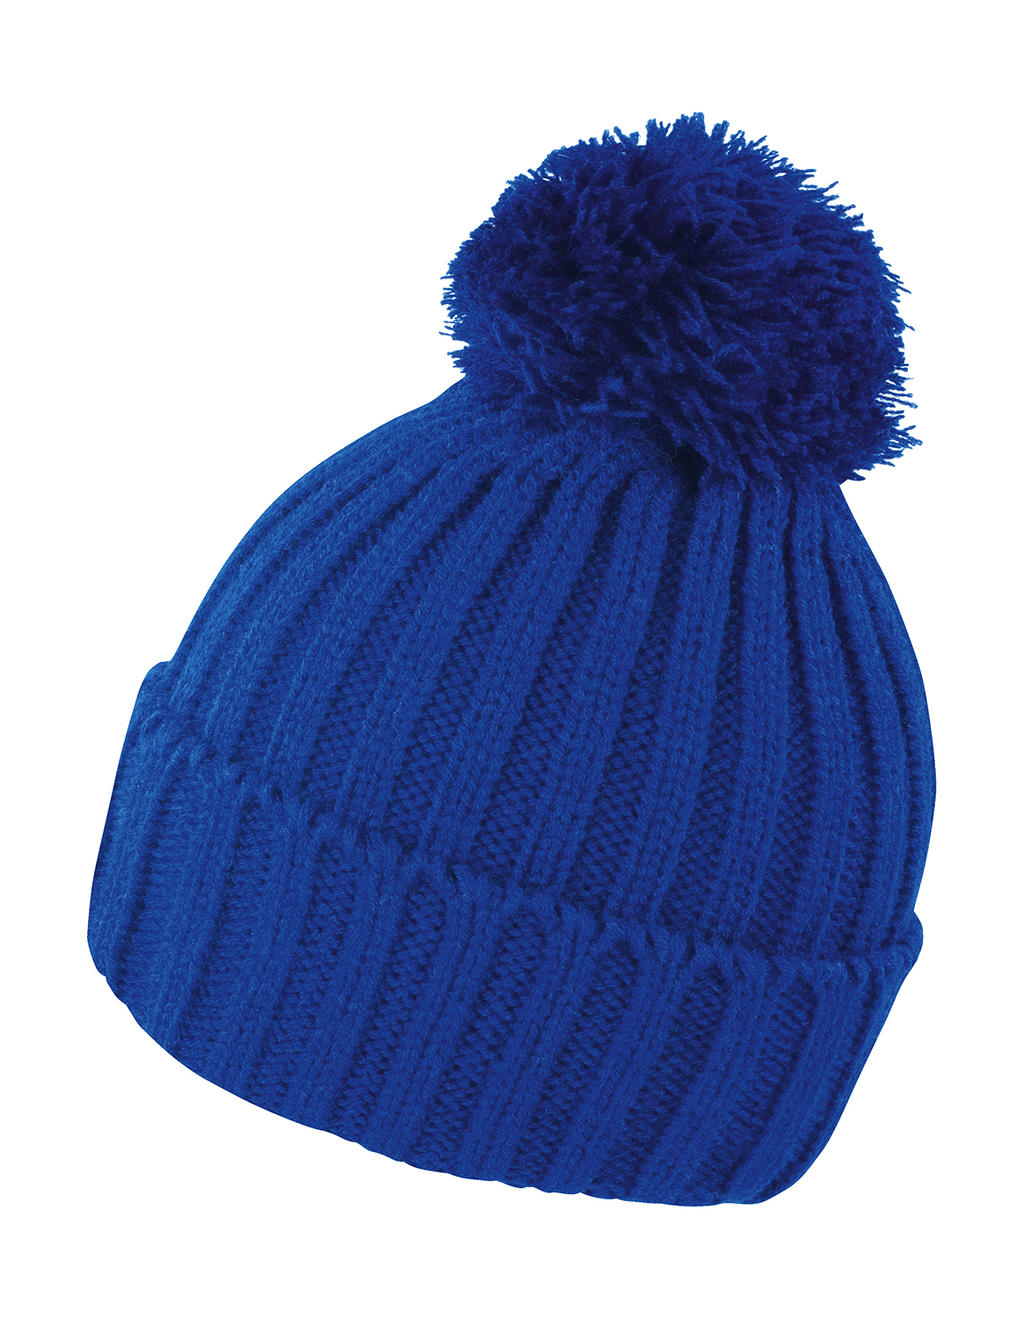  Hdi Quest Knitted Hat in Farbe Royal